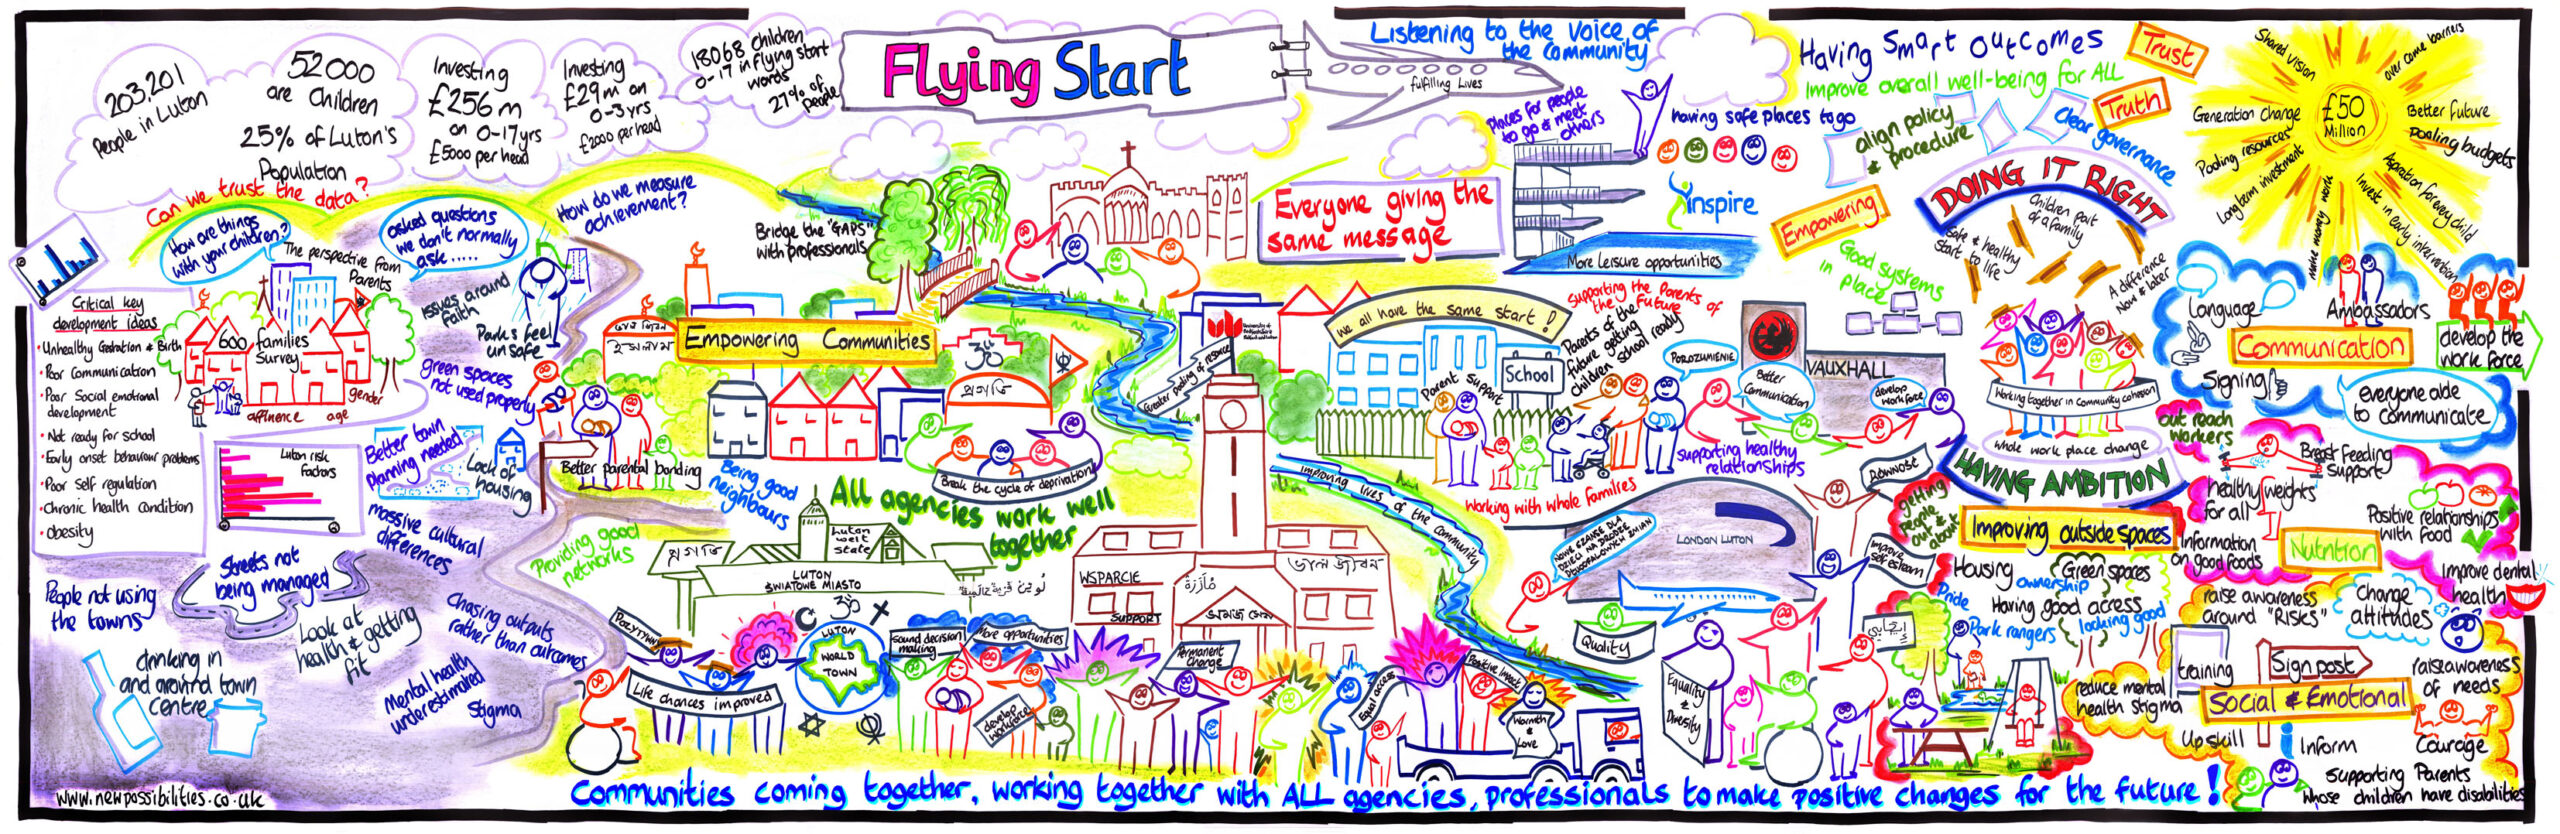 Healthy Eating - Flying Start Luton